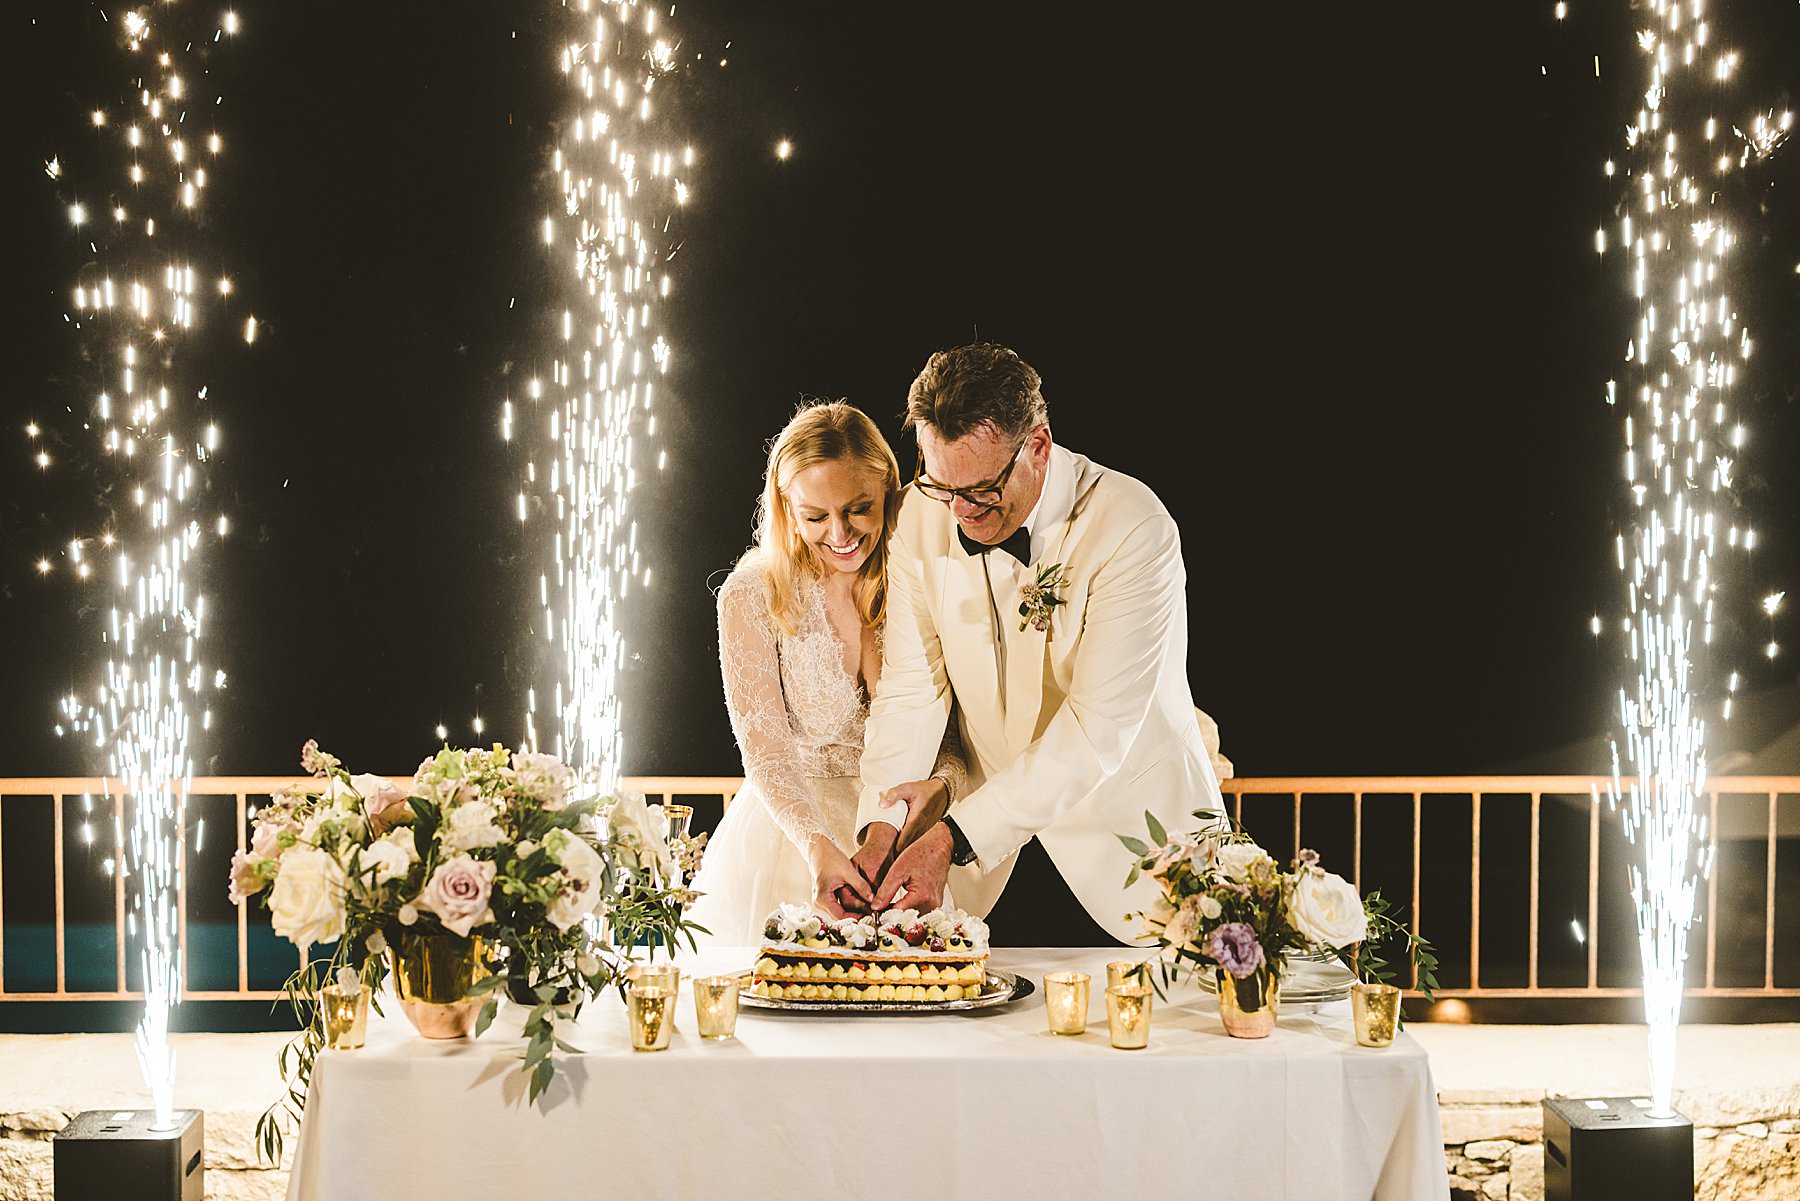 Lovely and unforgettable elopement wedding cake cutting with sparkling lights at Borgo Pignano